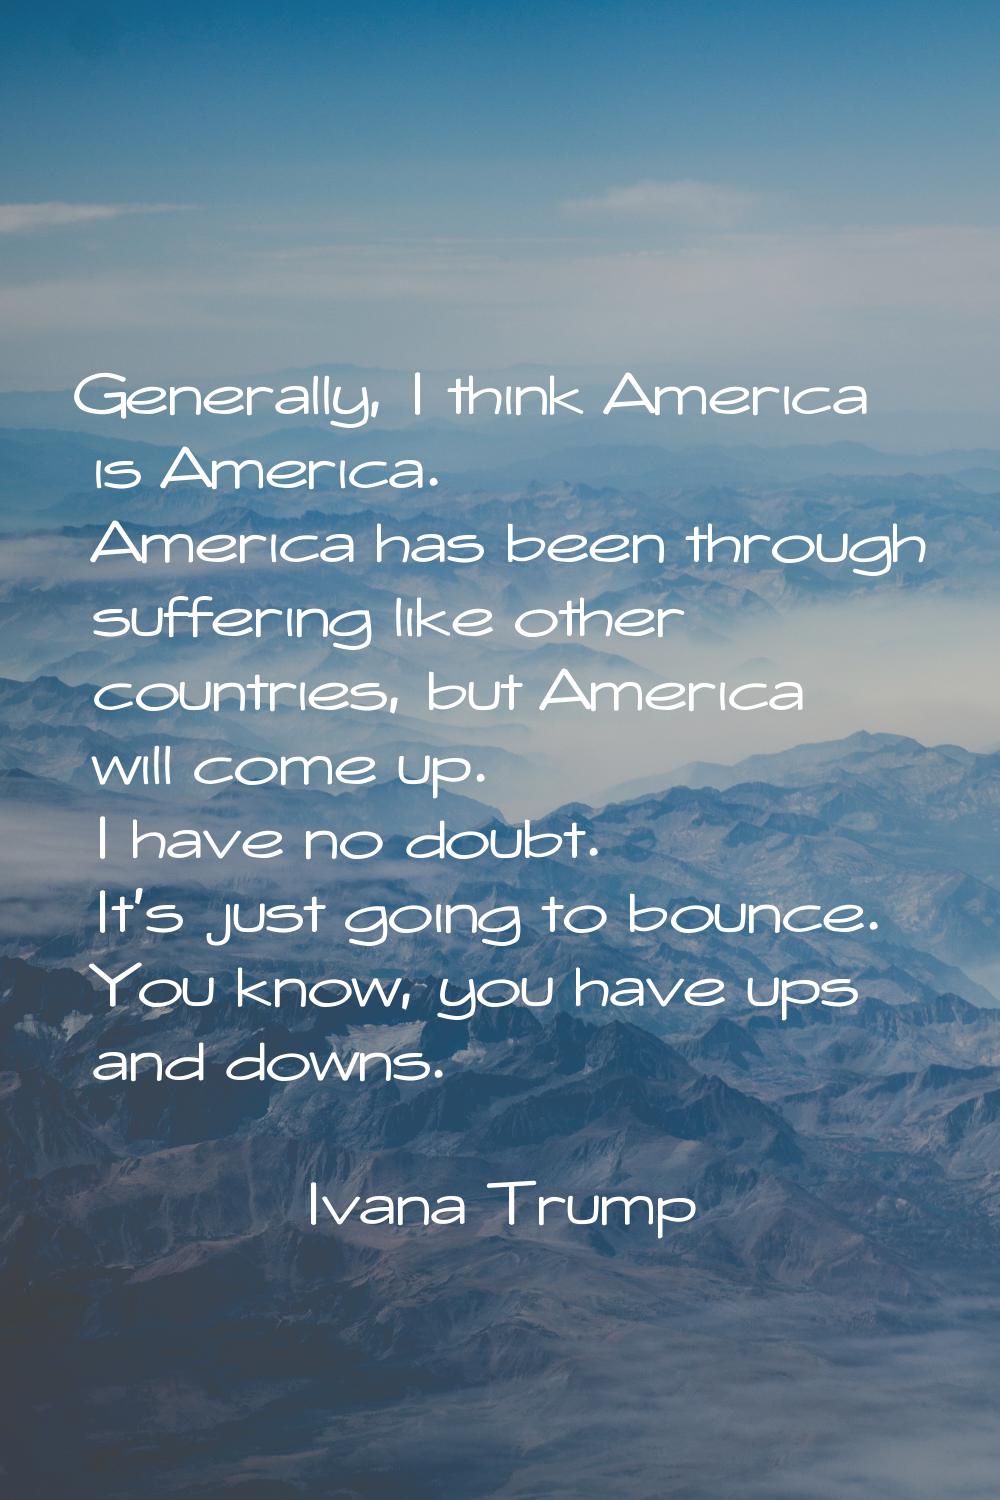 Generally, I think America is America. America has been through suffering like other countries, but